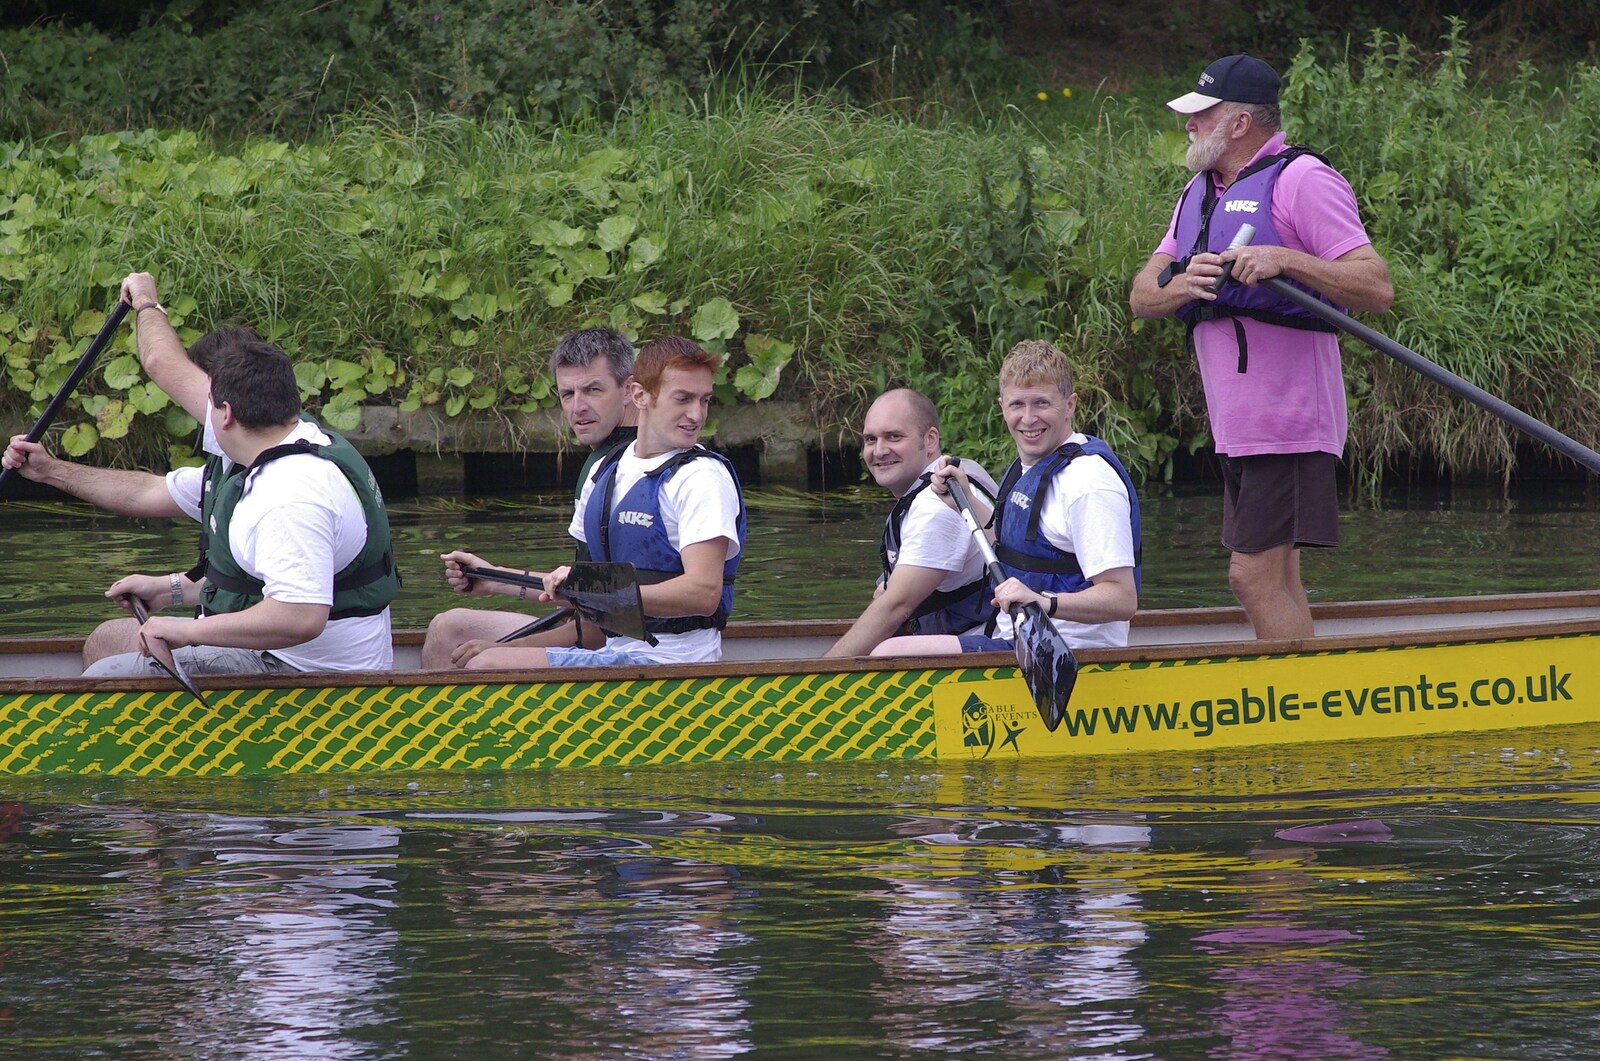 Qualcomm's Dragon-Boat Racing, Fen Ditton, Cambridge - 8th September 2007: John, Francis and Steve look over